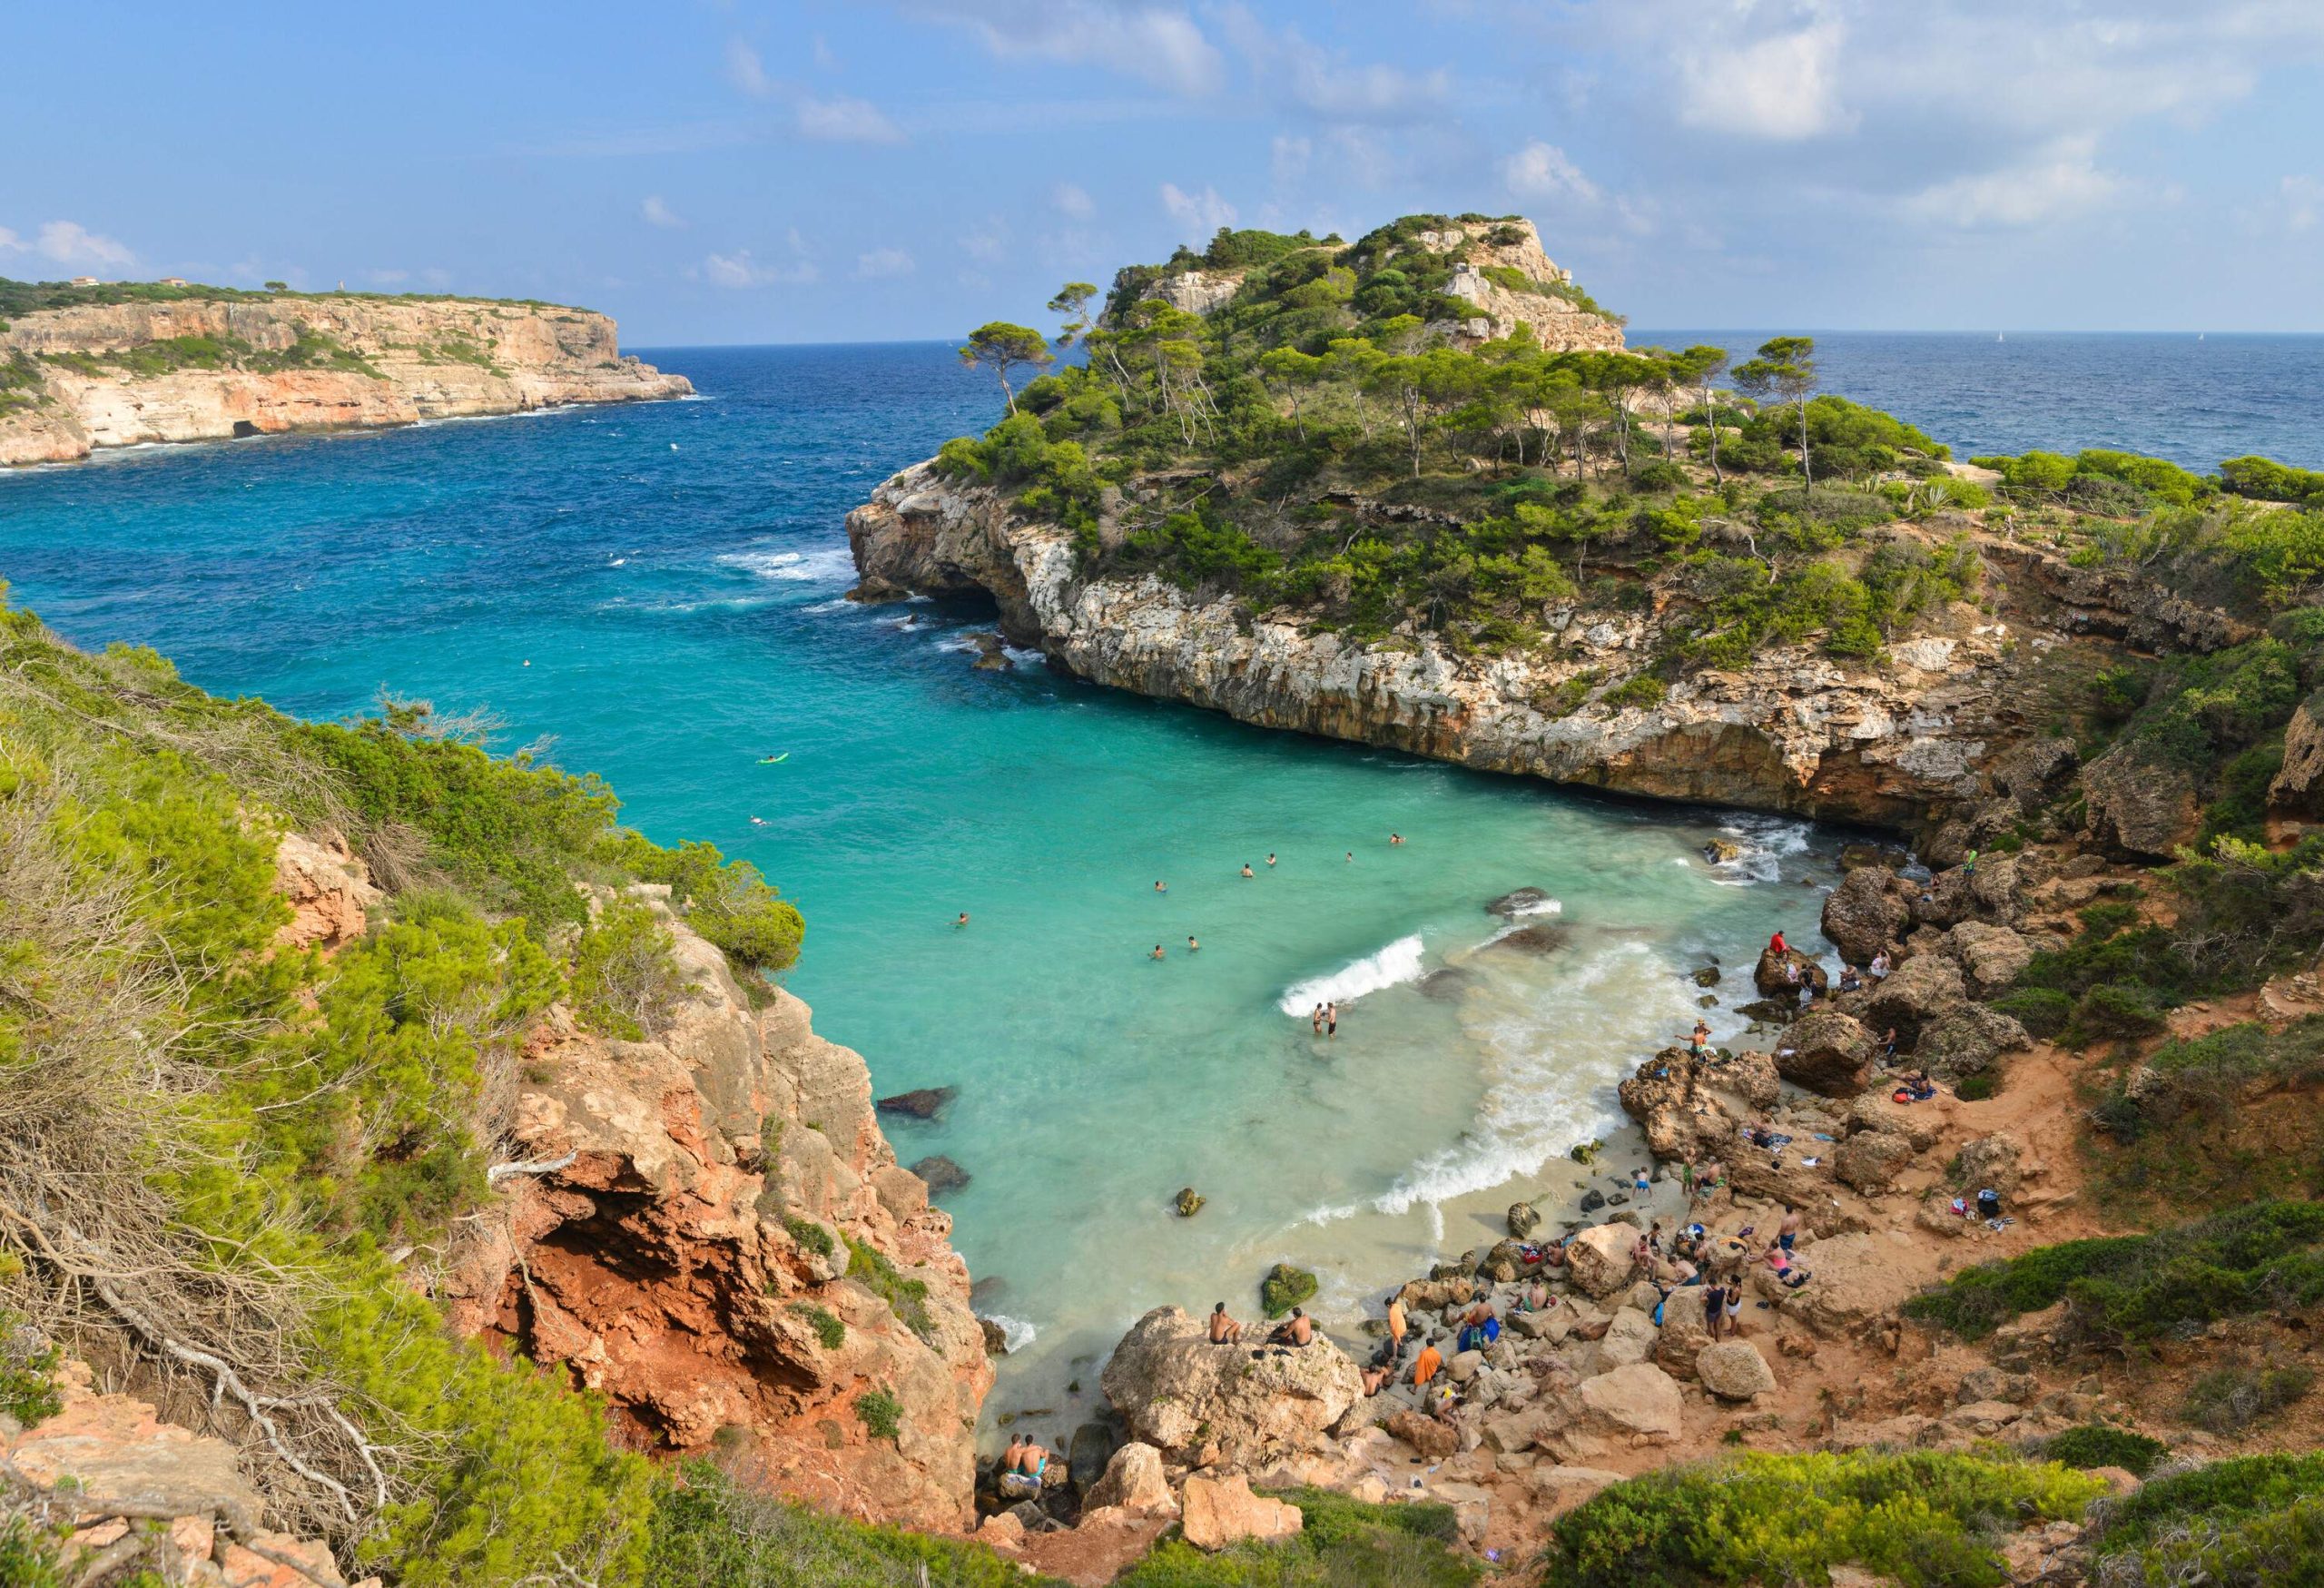 A beach with clear turquoise waters surrounded by trees on top of sheer cliffs.